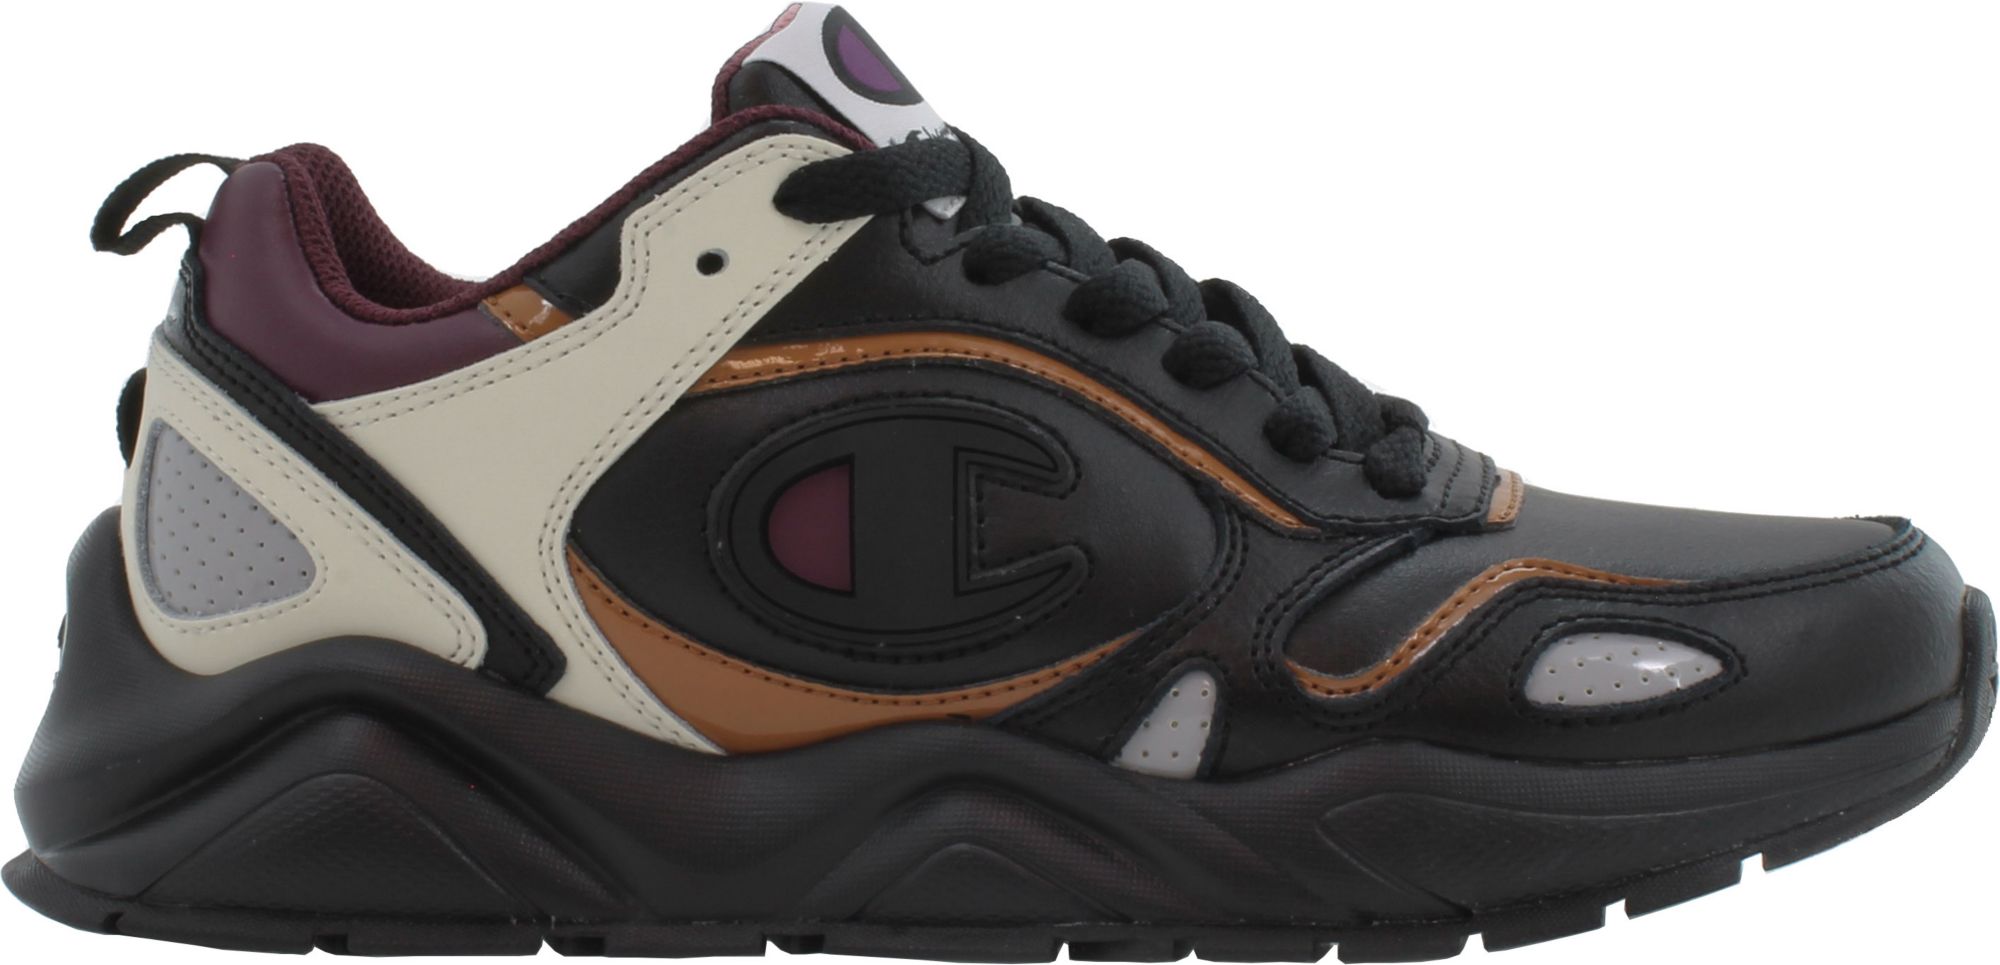 champion cushion fit shoes review